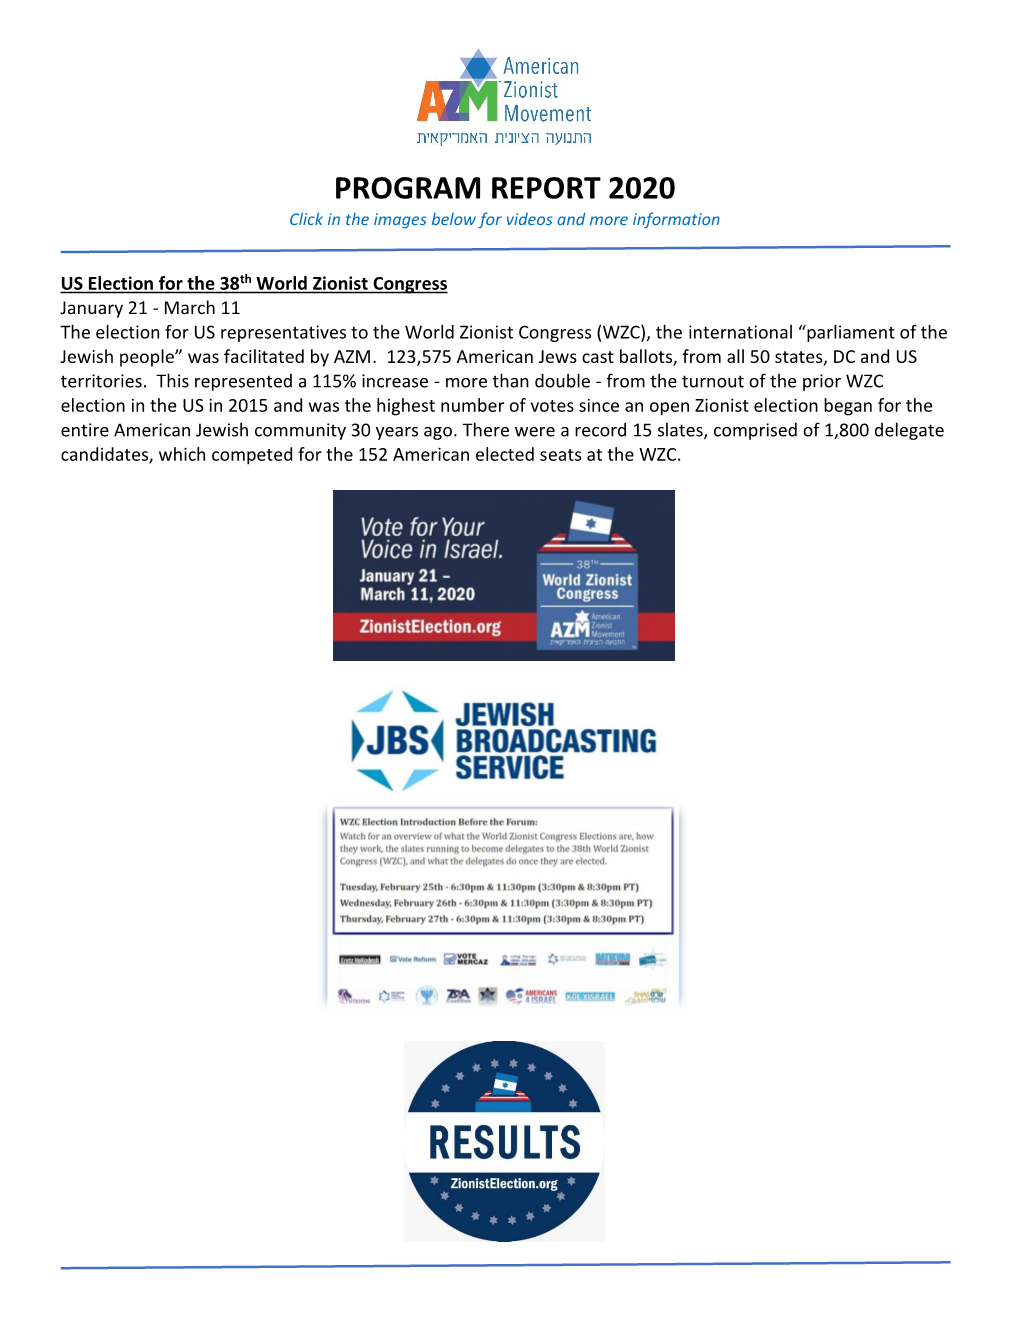 PROGRAM REPORT 2020 Click in the Images Below for Videos and More Information